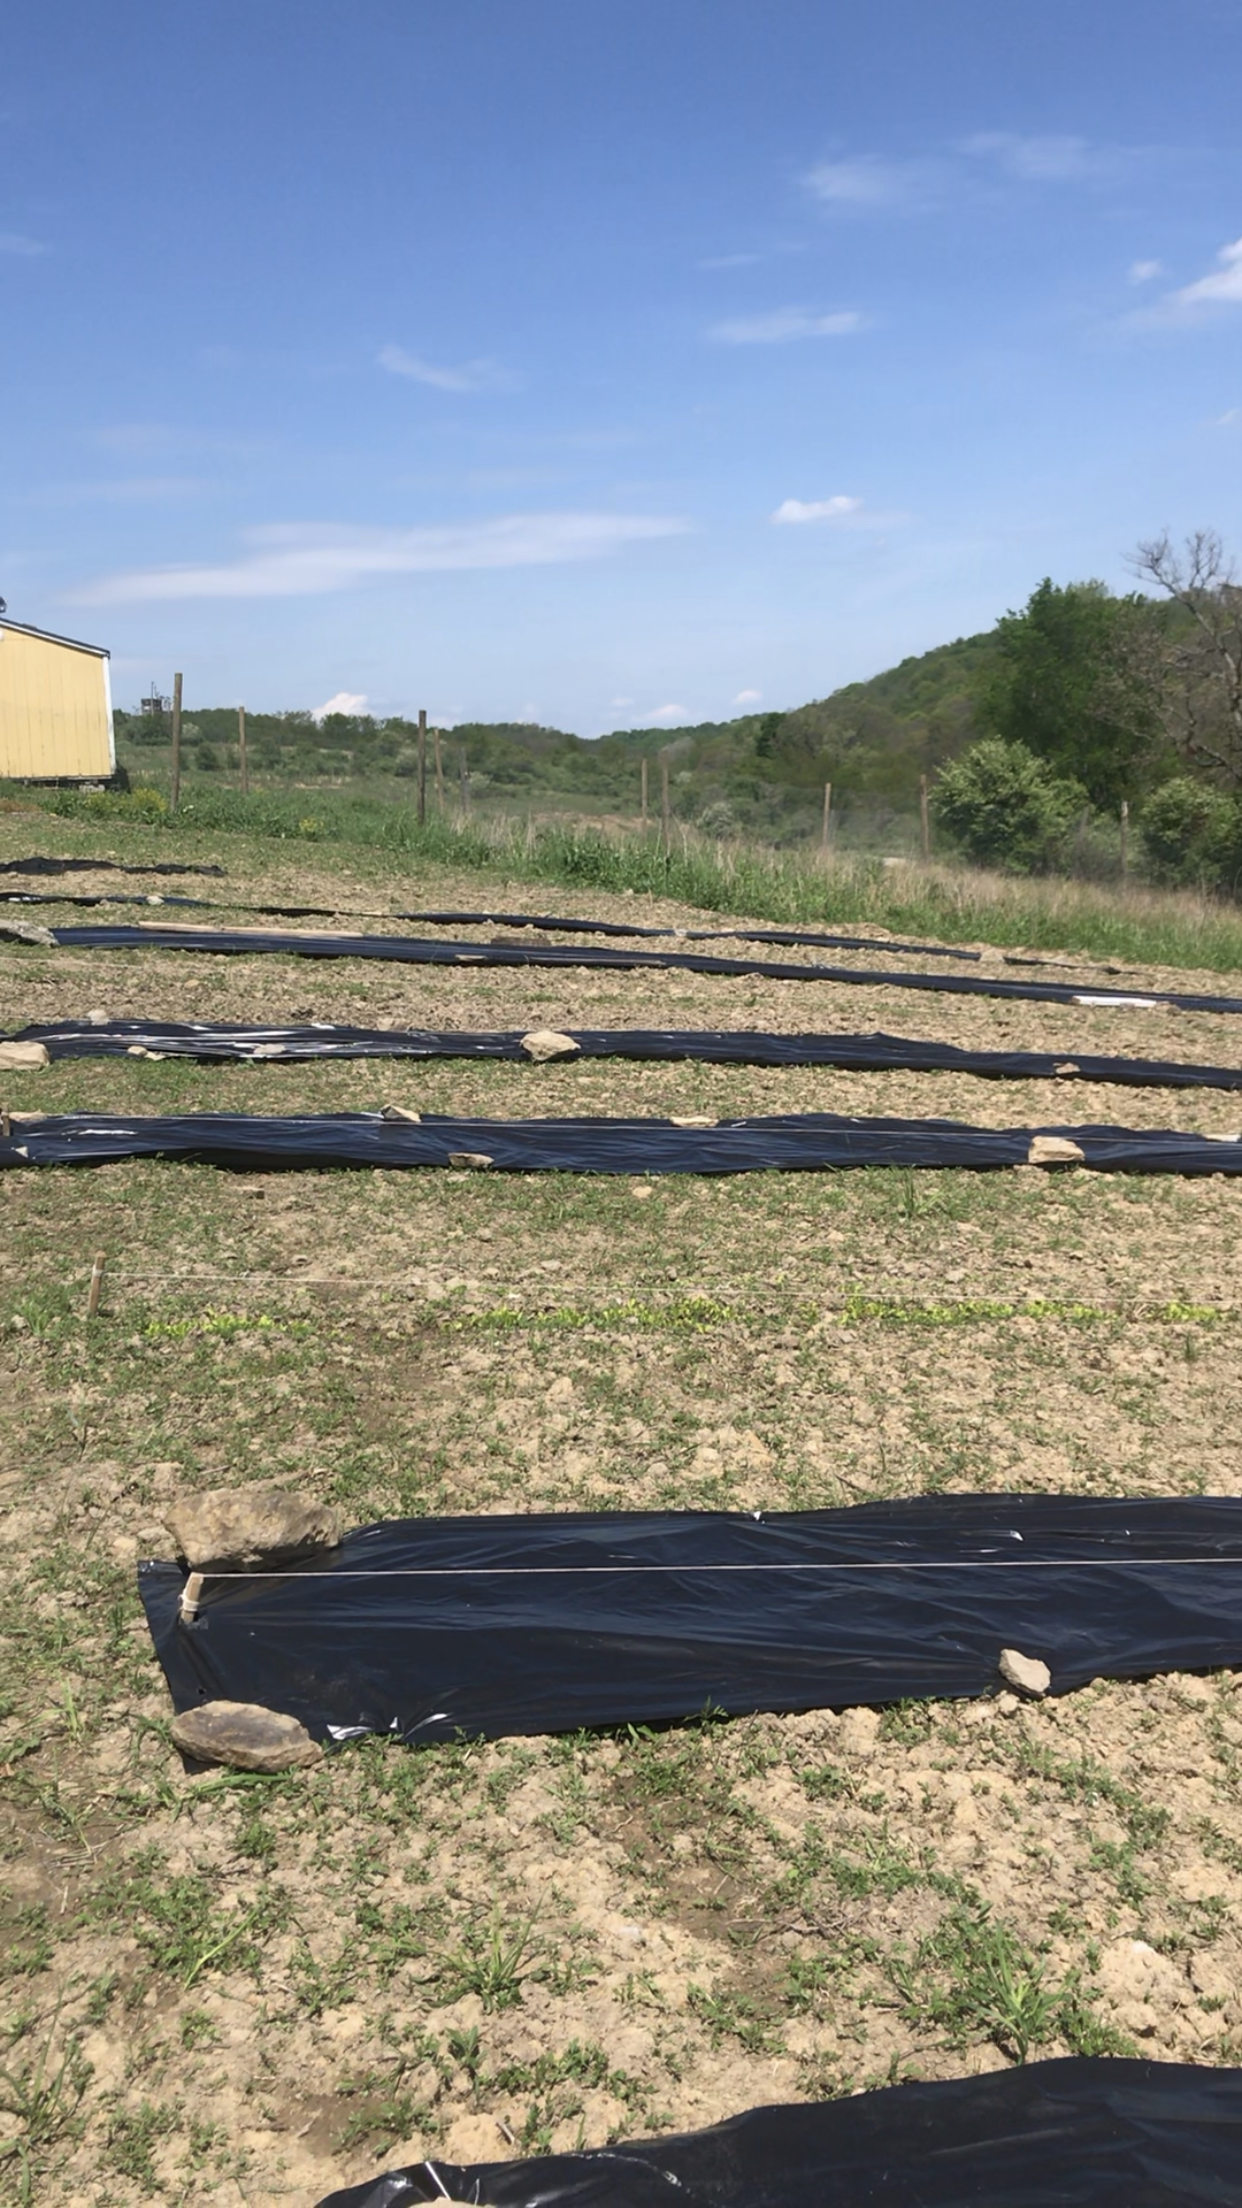 Laying the plastic down in the rows